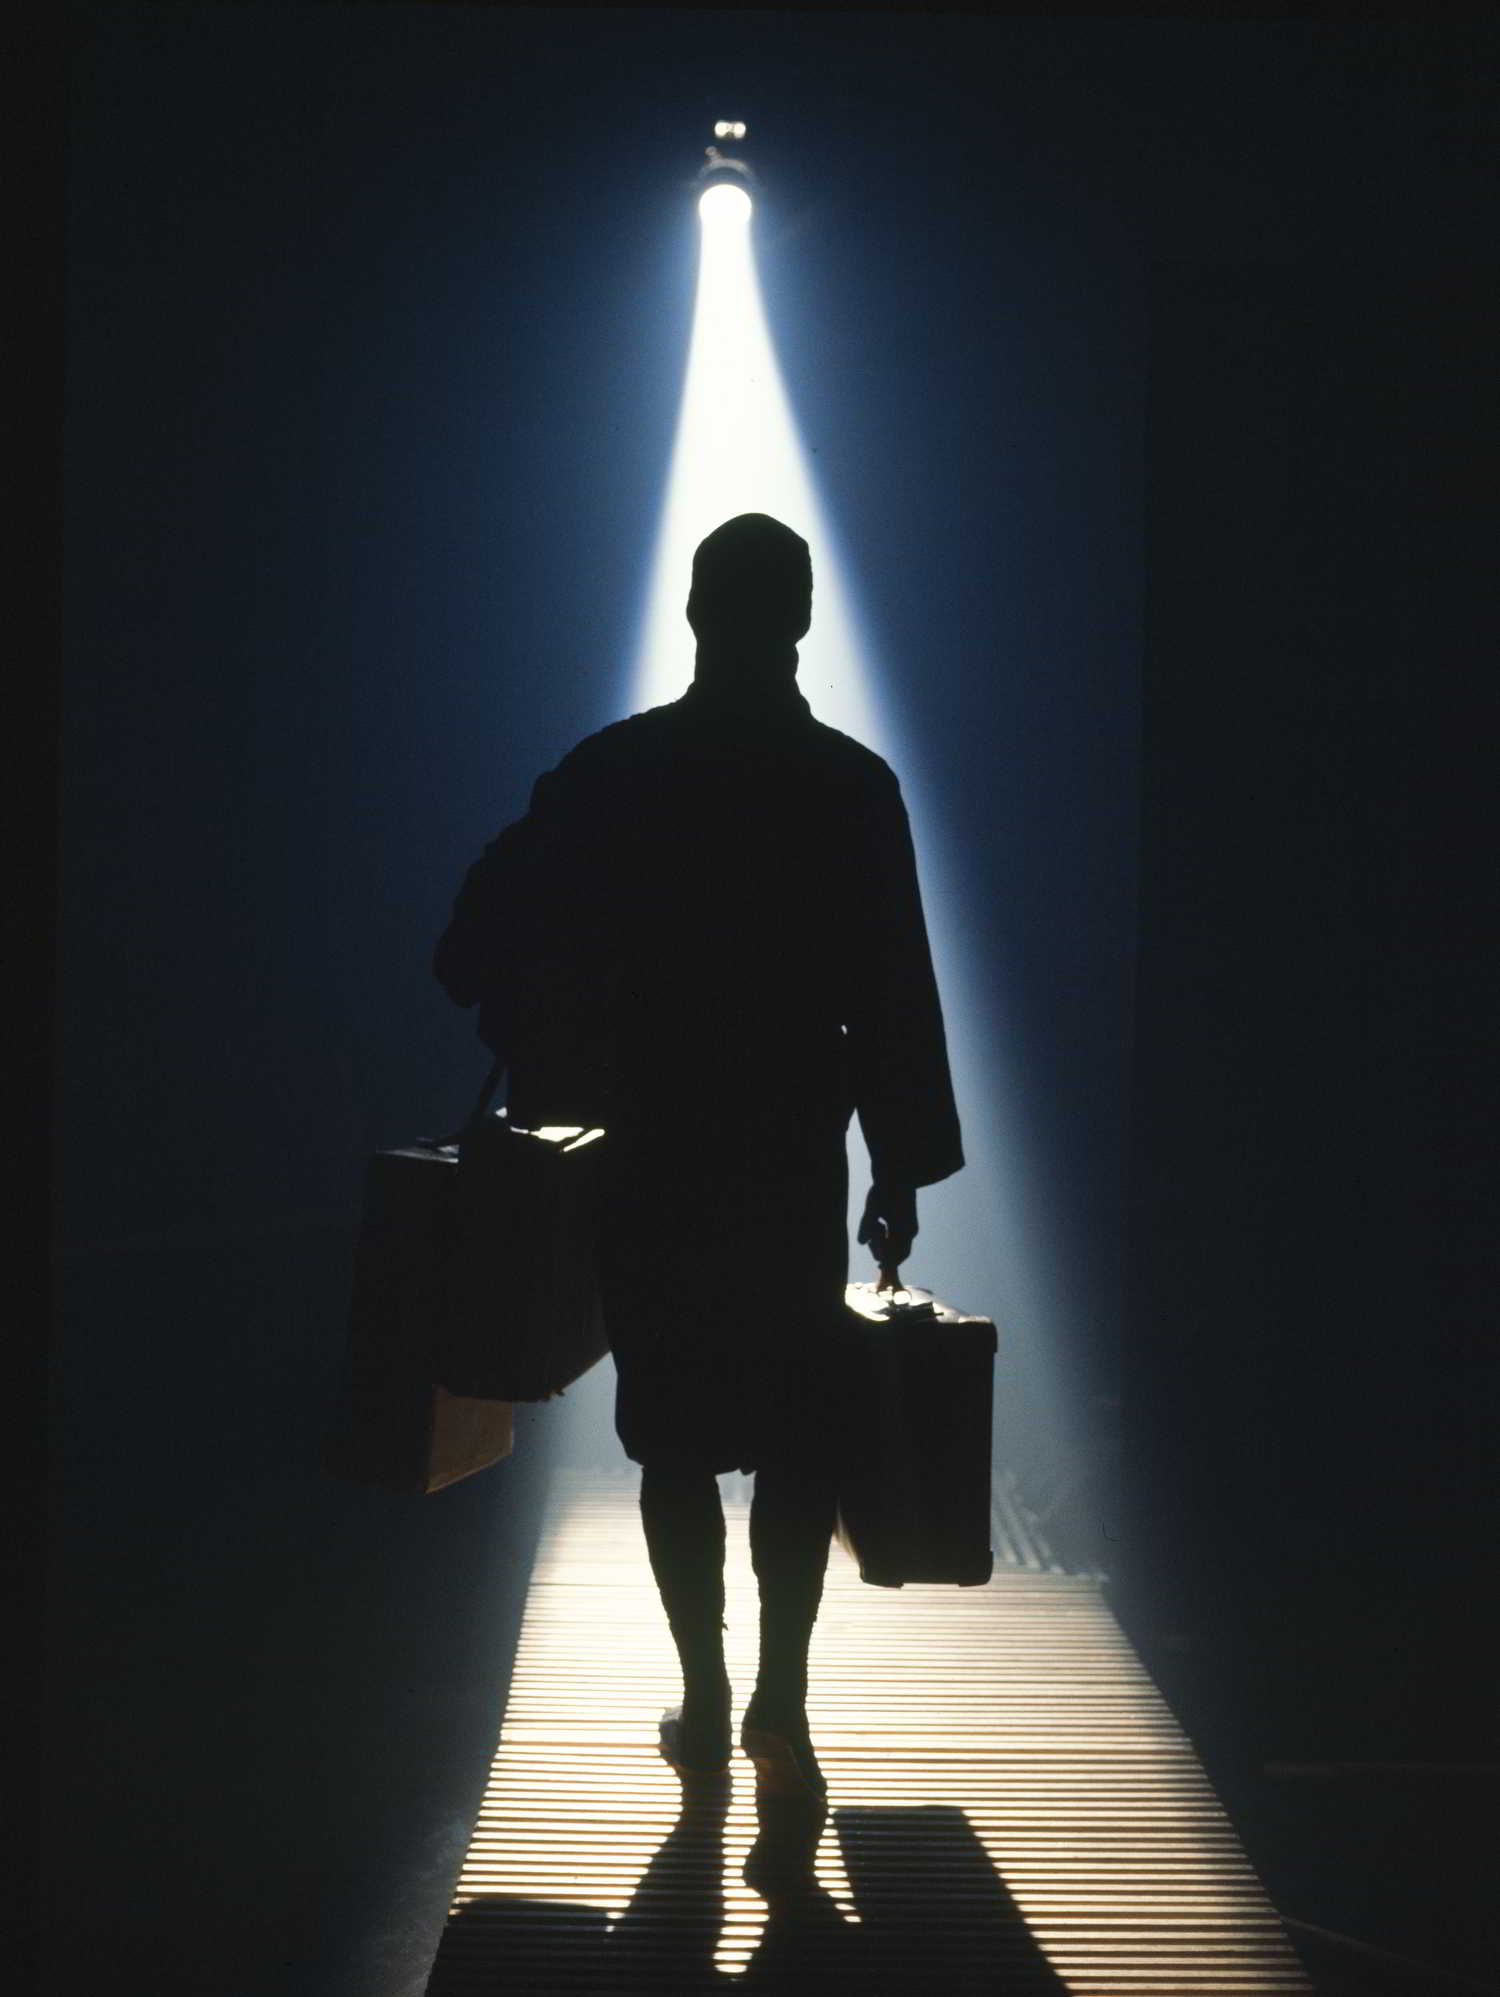 Secrets Handspan Theatre man carrying two suitcases, silhouetted against a shaft of light